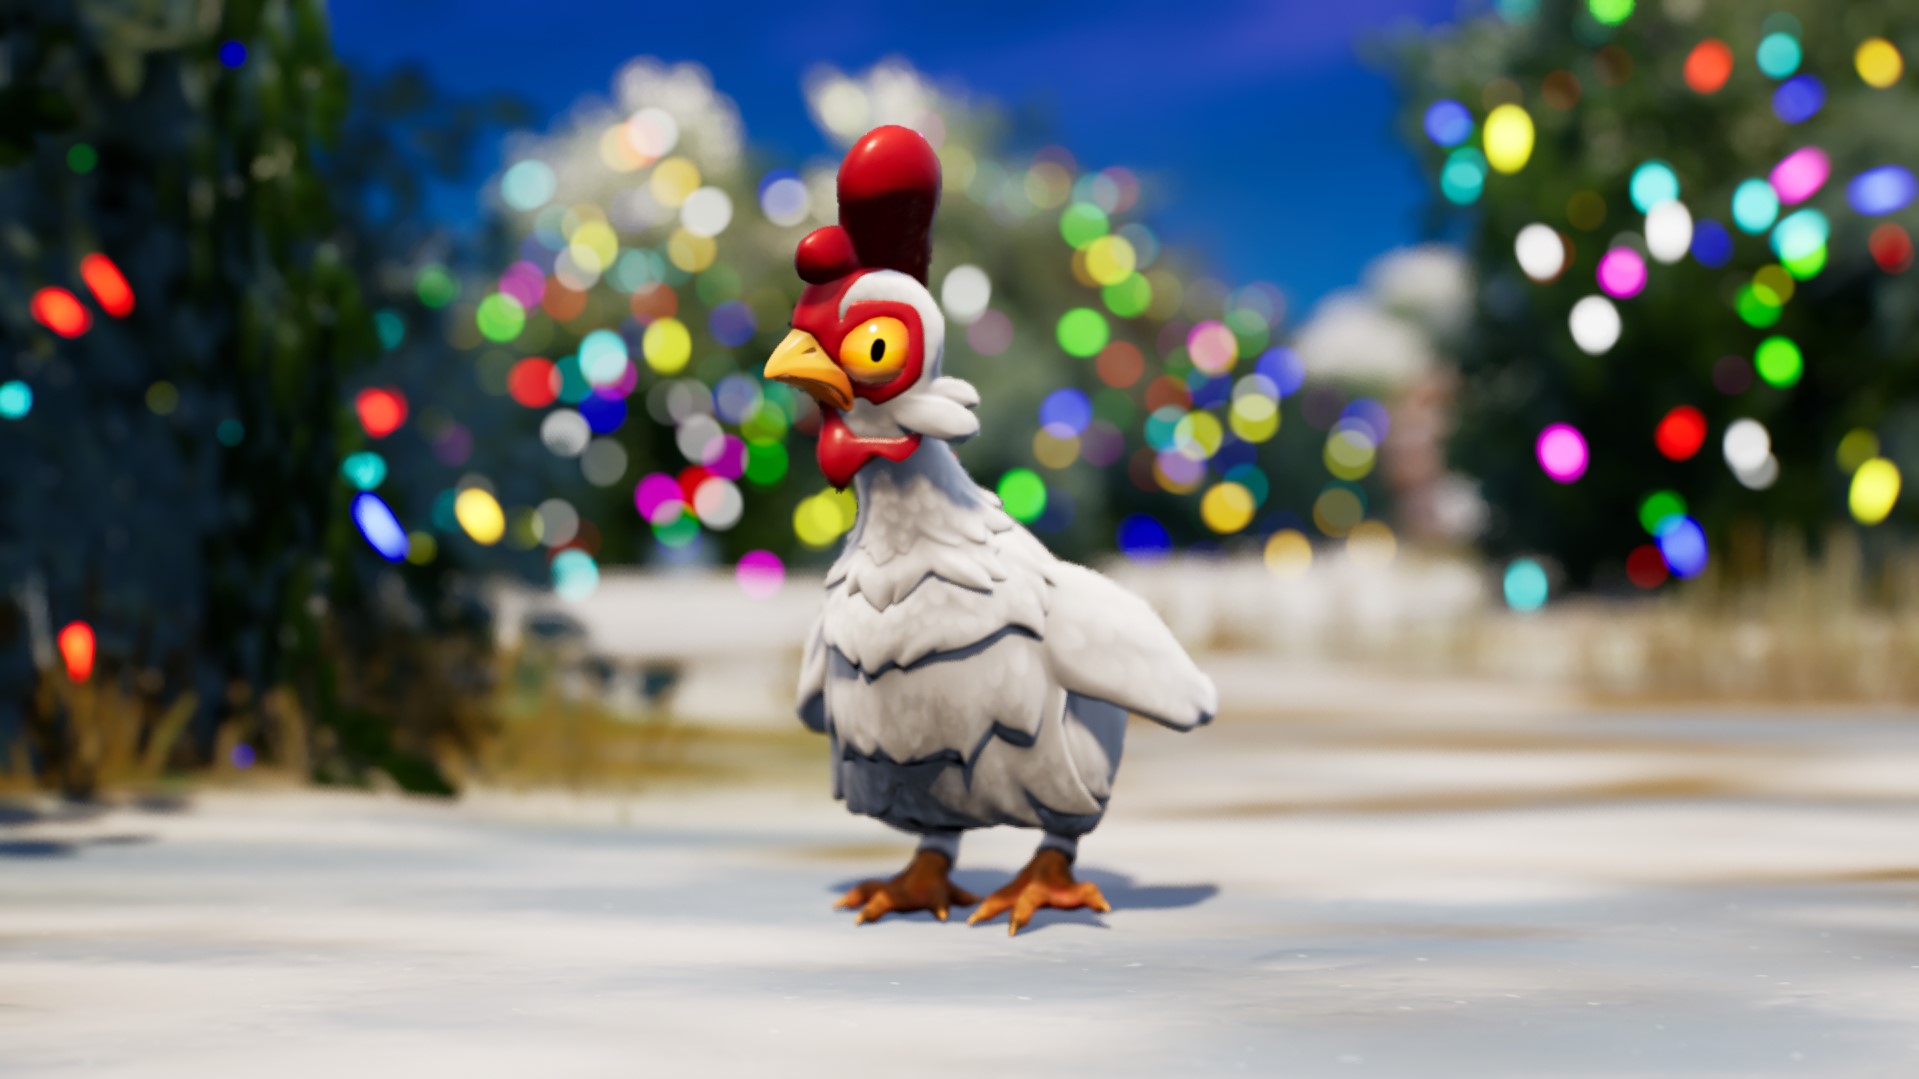 Fly with a chicken - Winterfest 2021 challenge  